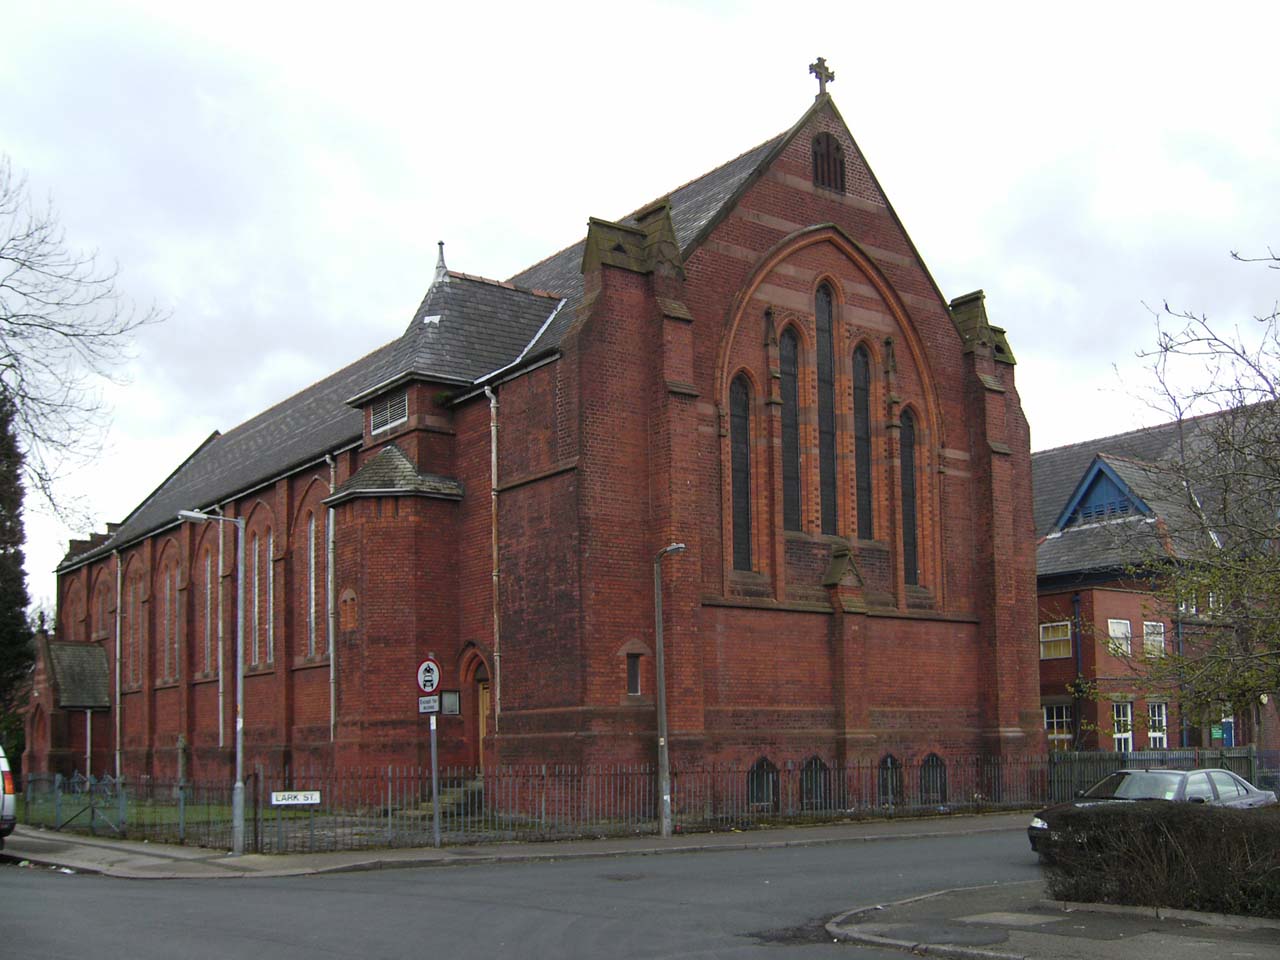 The Church of St Peter, Farnworth with Kearsley